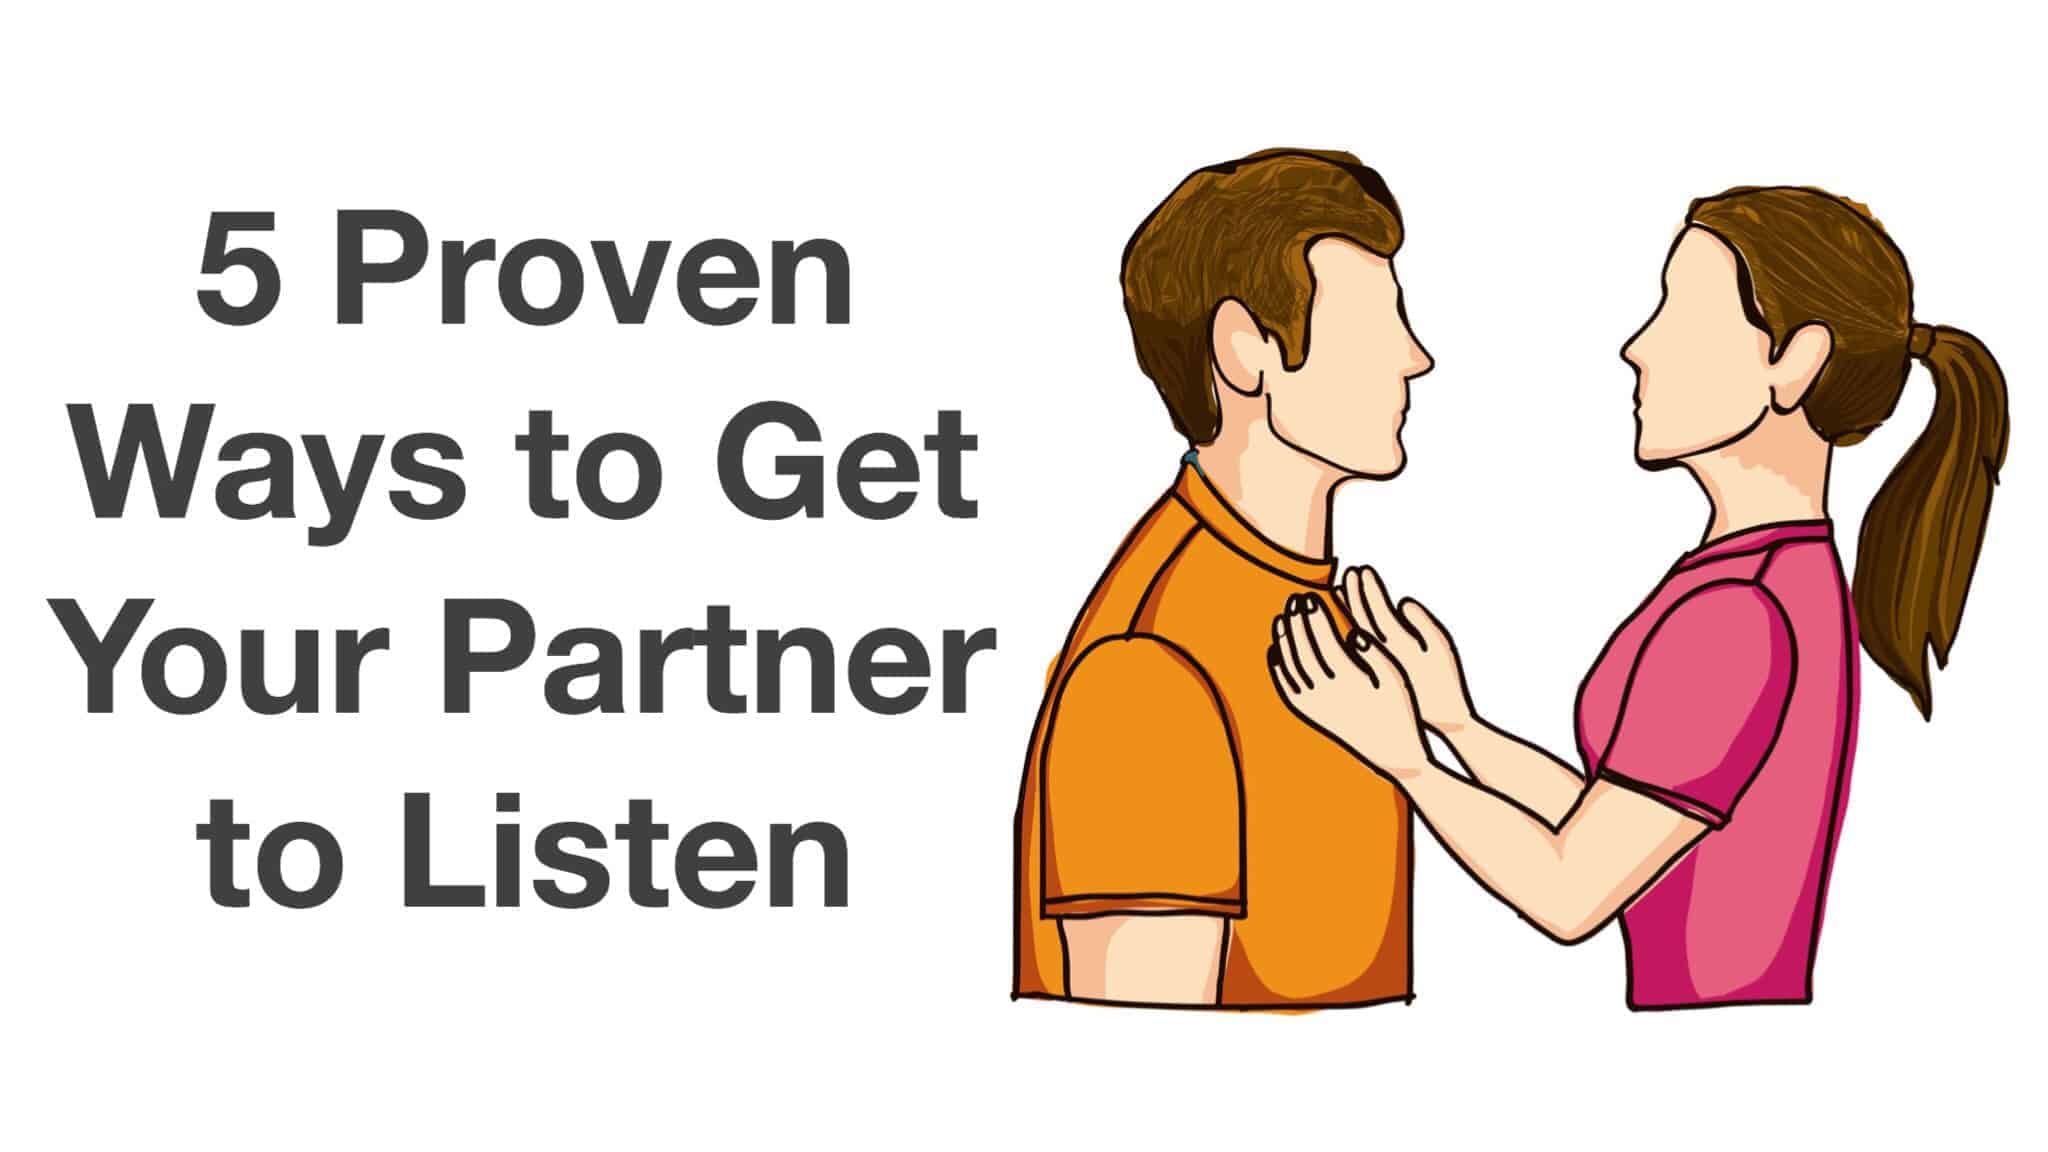 5 Proven Ways to Get Your Partner to Listen